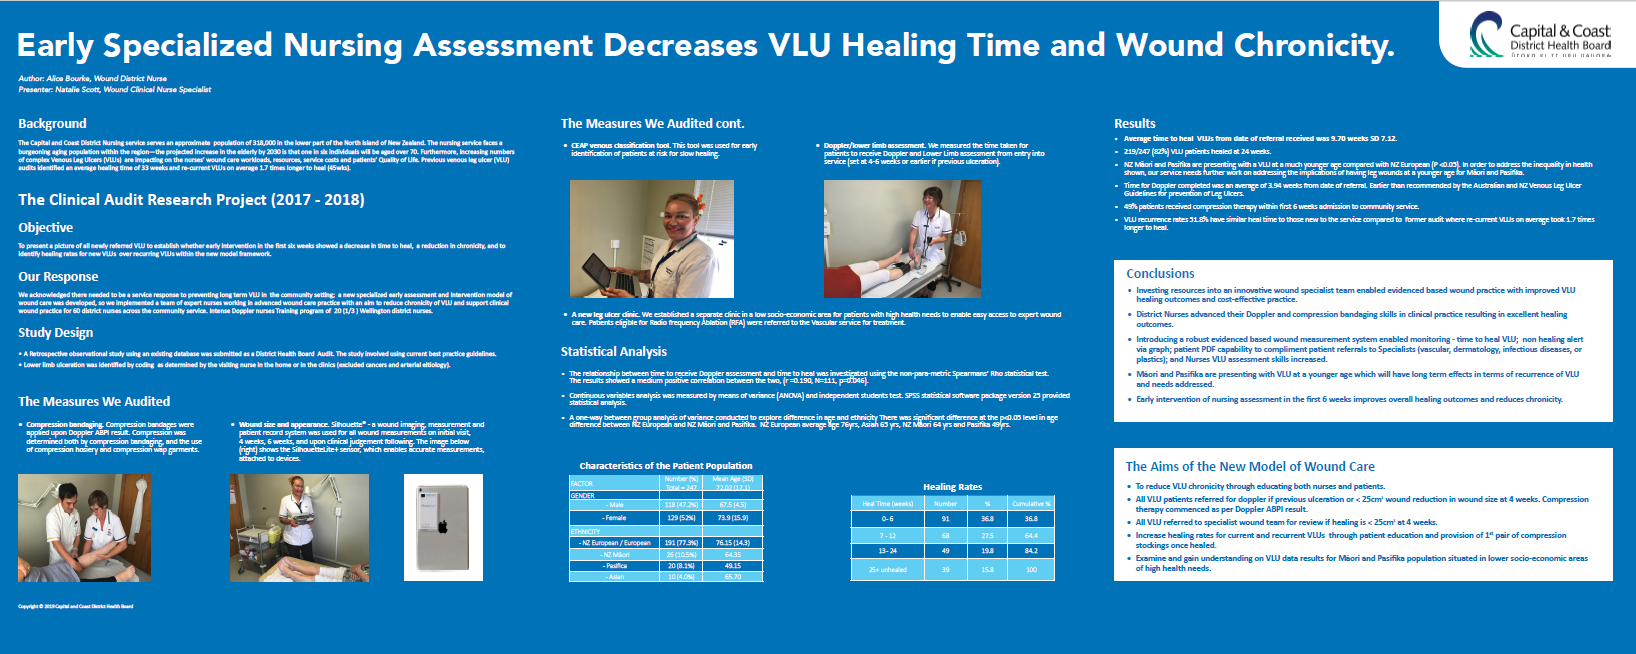 Early Specialize Nursing Assessment Decreases VLU Healing Time and Wound Chronicity